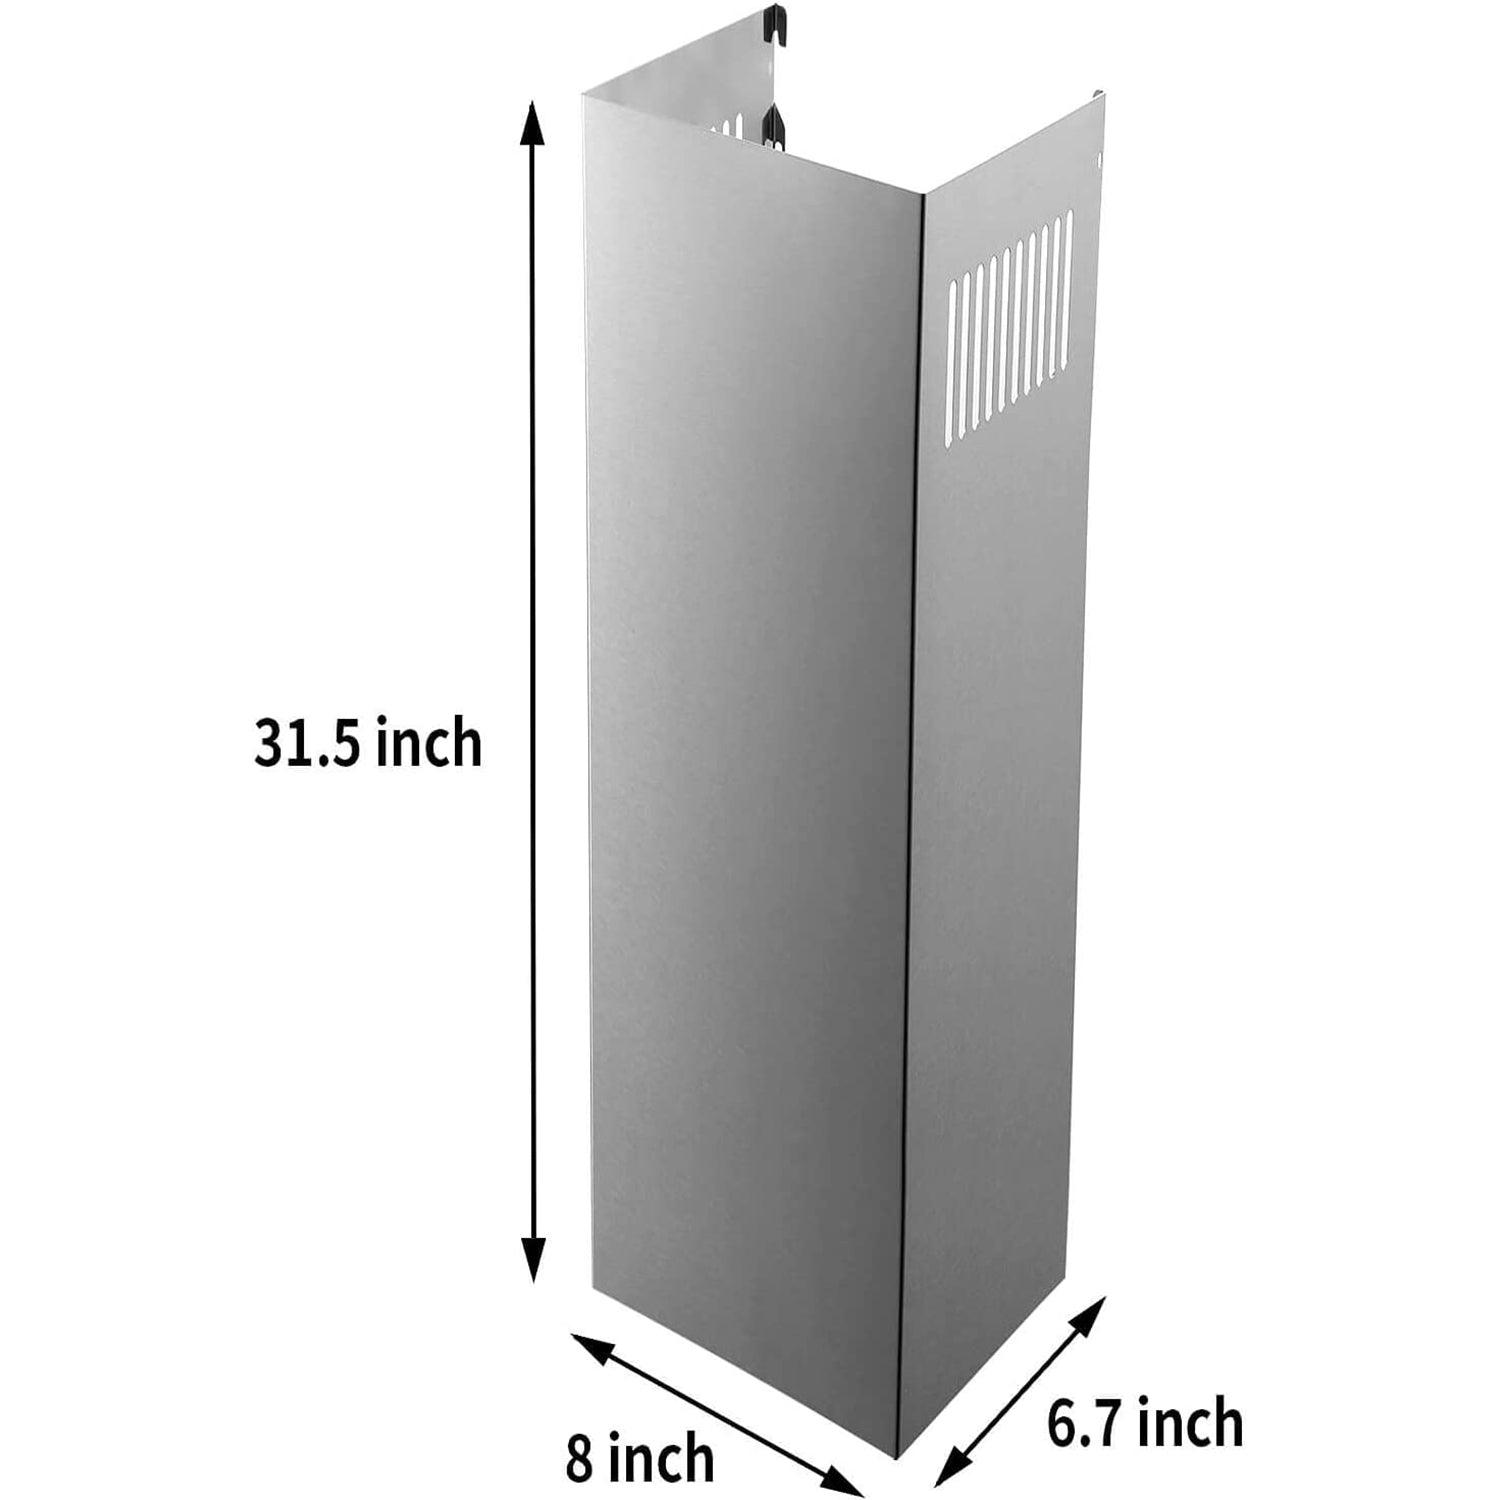 Stainless Steel Chimney Extension for Tieasy Range Hood GD17 and GD24 Series, 31.5 inch, Wall-Mounted style (Silver)